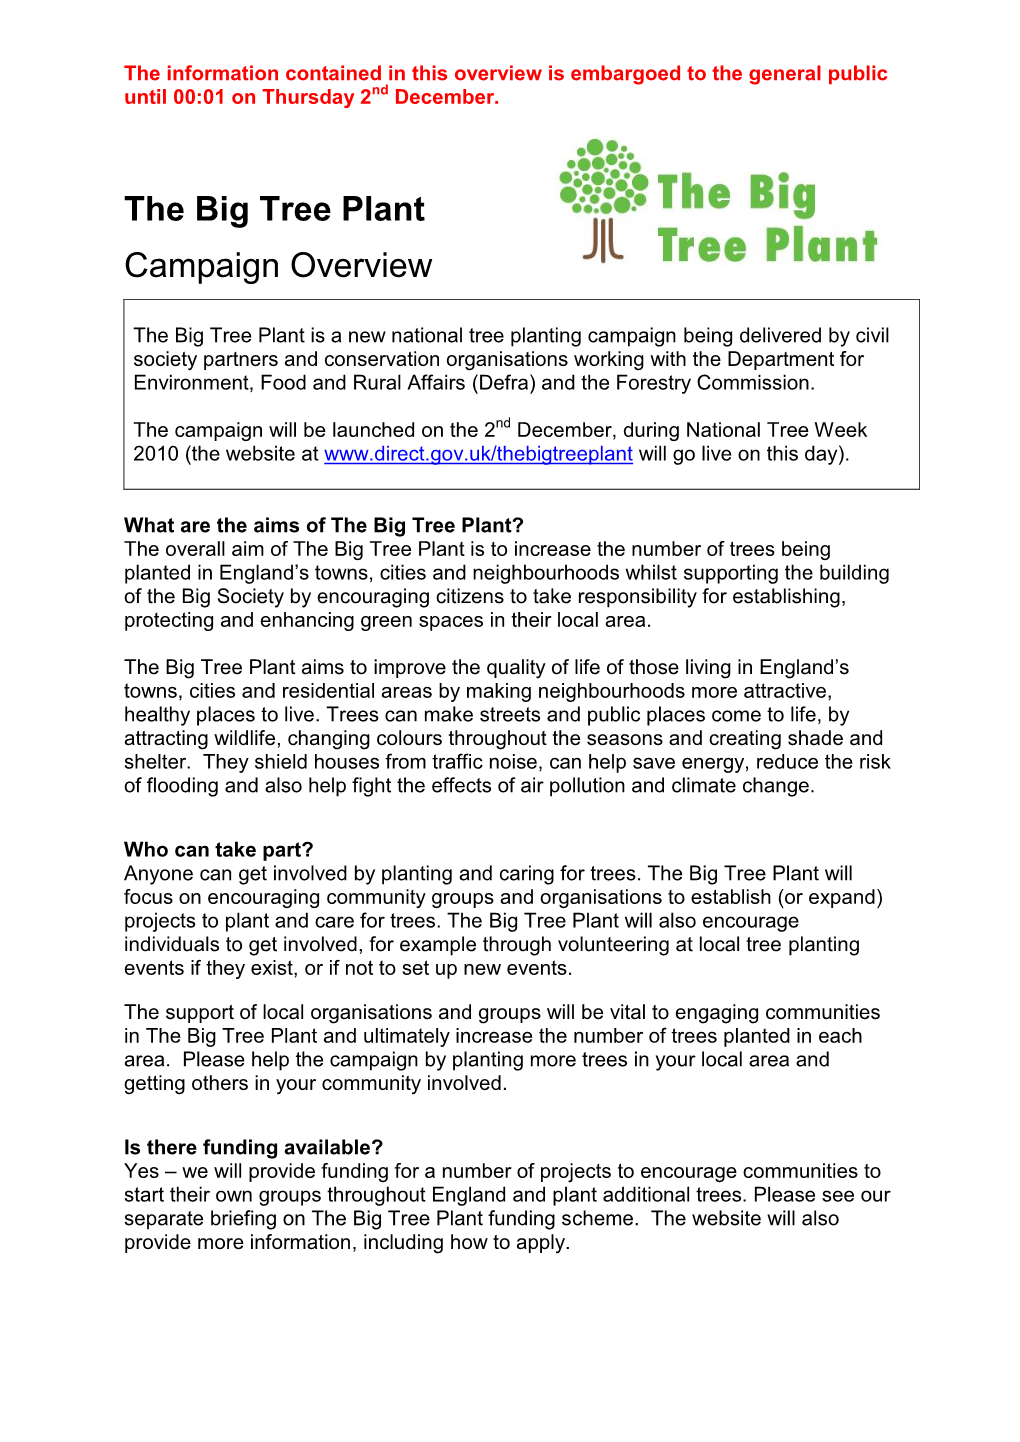 The Big Tree Plant Campaign Overview